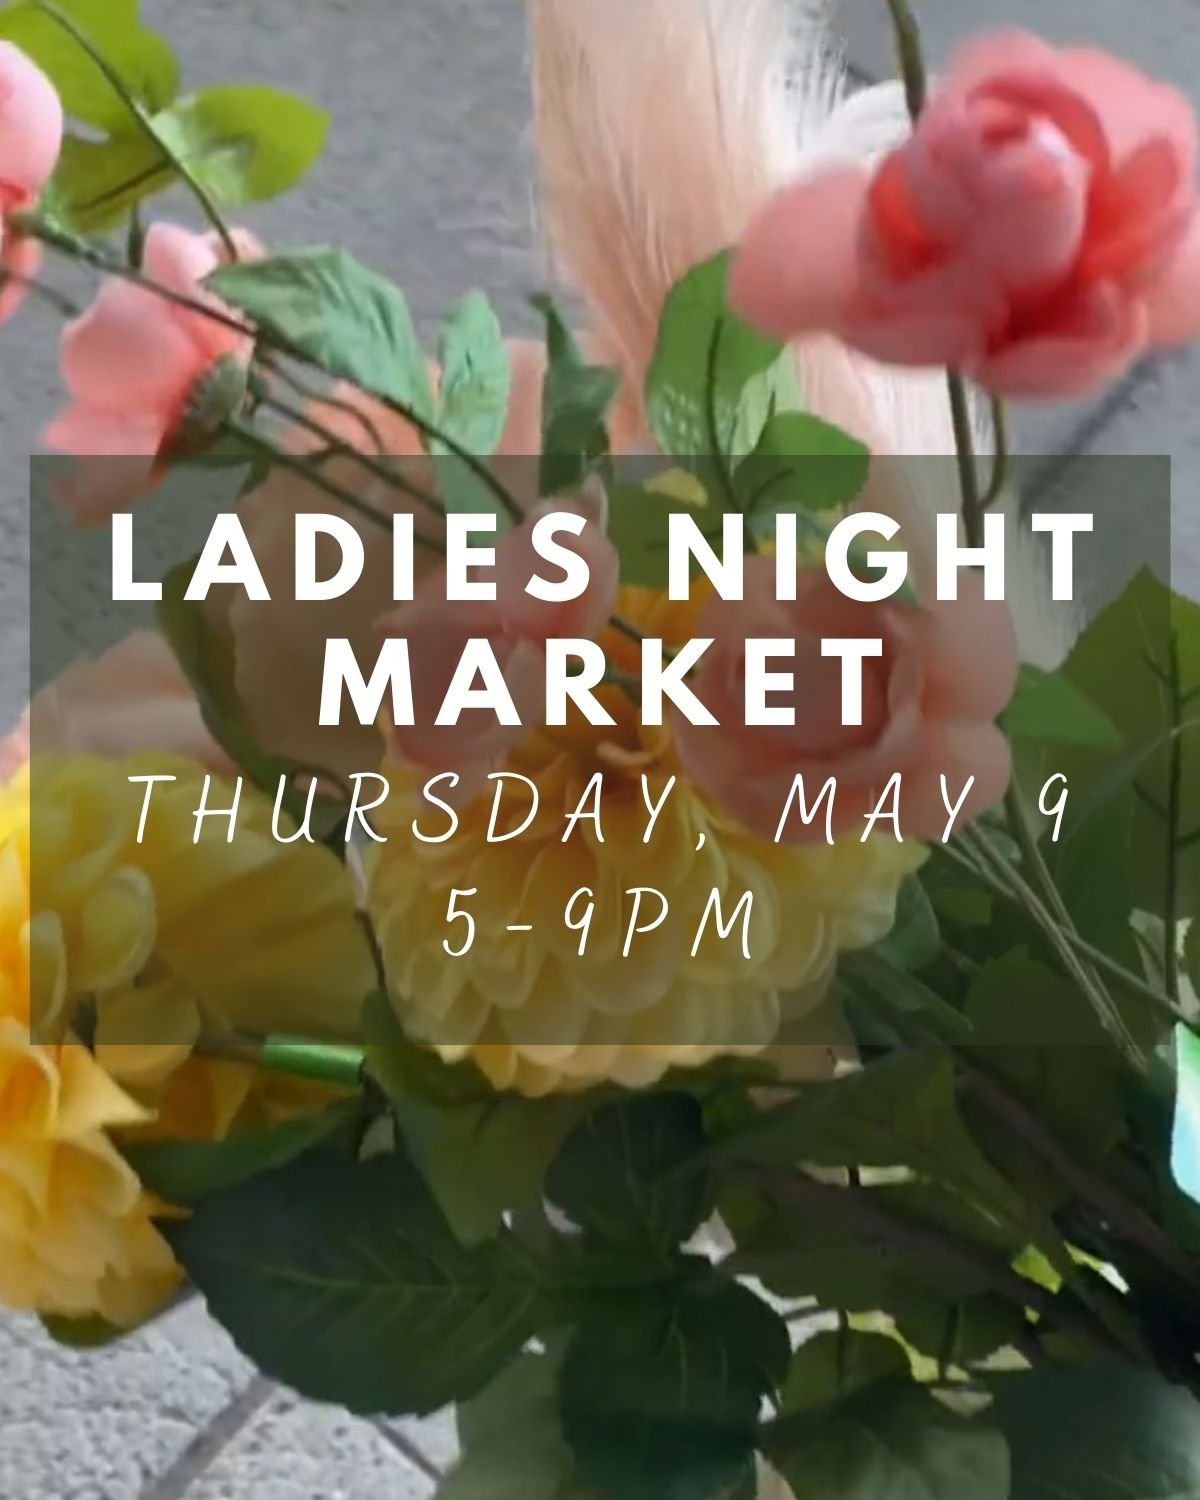 Make your dinner reservations today for our Ladies Night Spring Market happening THIS Thursday, May 9th, from 5-9pm in our atrium. Explore goods from over 14 local vendors while treating yourself to a delicious dining experience. As an added bonus, e